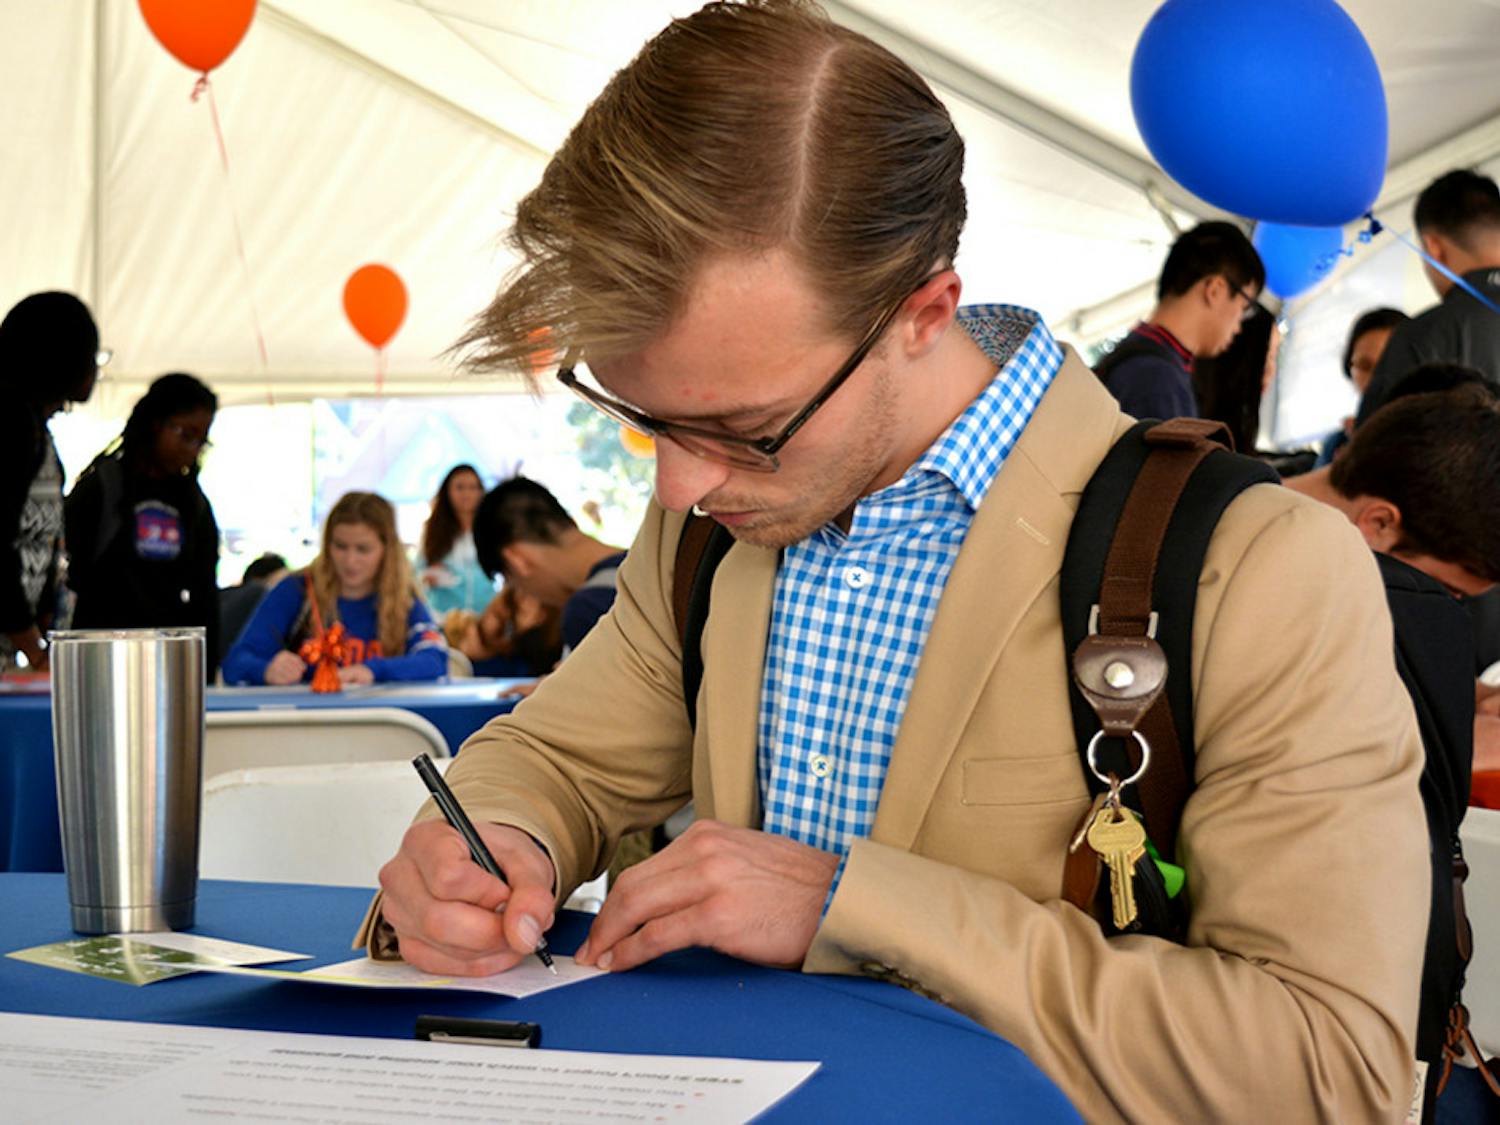 Jake Hughes, a UF chemical engineering junior, writes a letter at Grateful Gator Day. “It’s a cool idea,” he said. Hughes’ letter, addressed to Mr. and Mrs. Williams, was one of more than 2,000 that will be sent to donors.